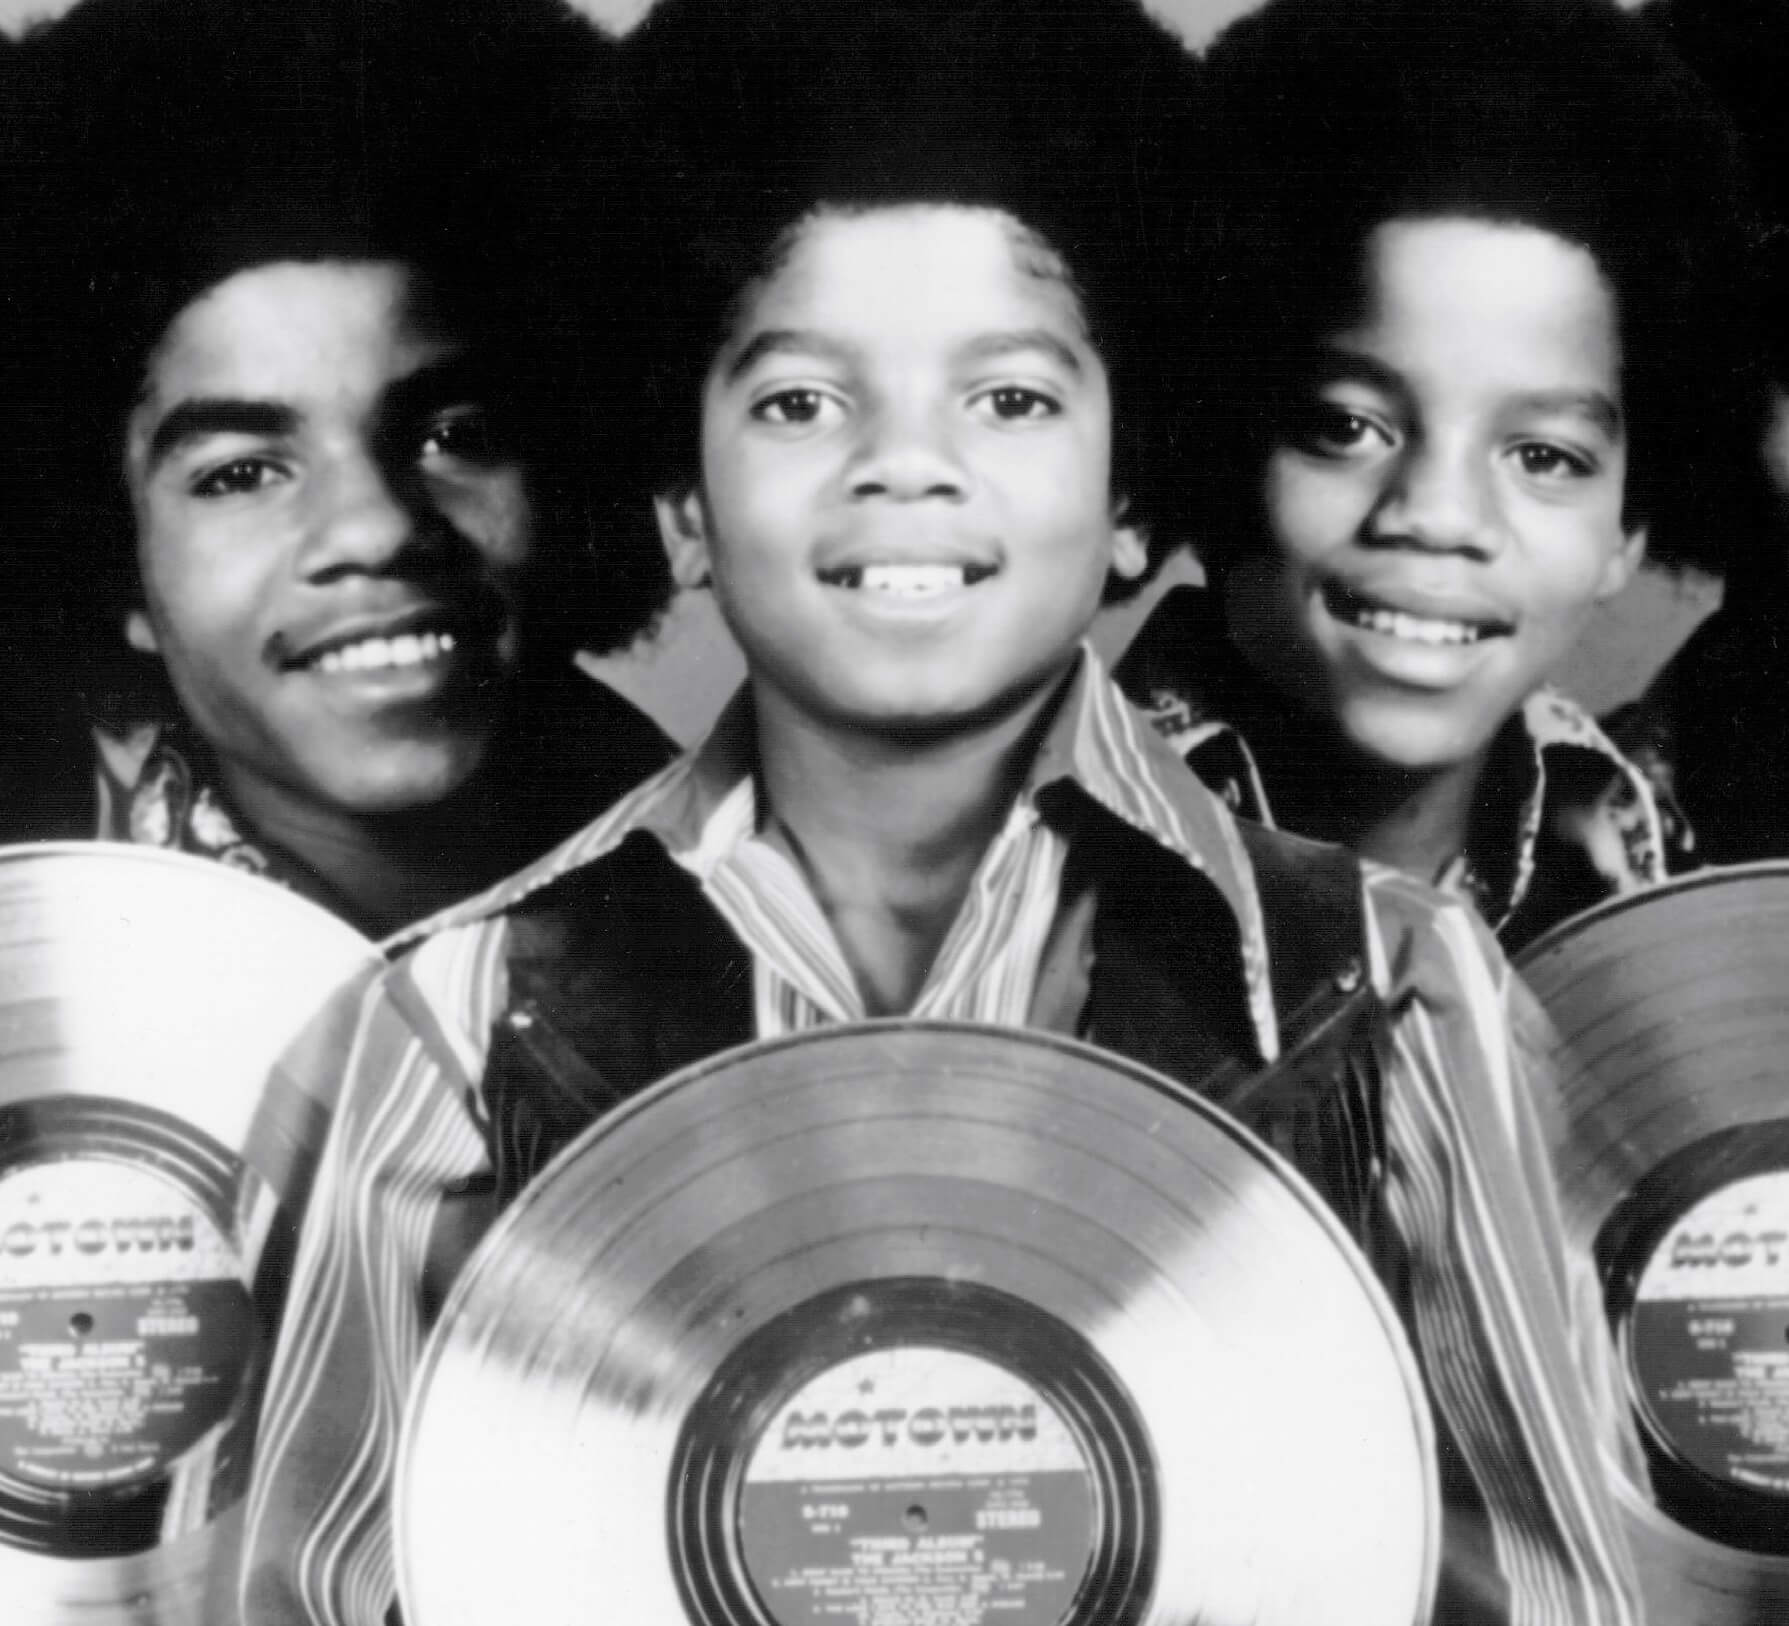 How Michael Jackson’s Pursuit of Perfection Began With ‘I Want You Back’